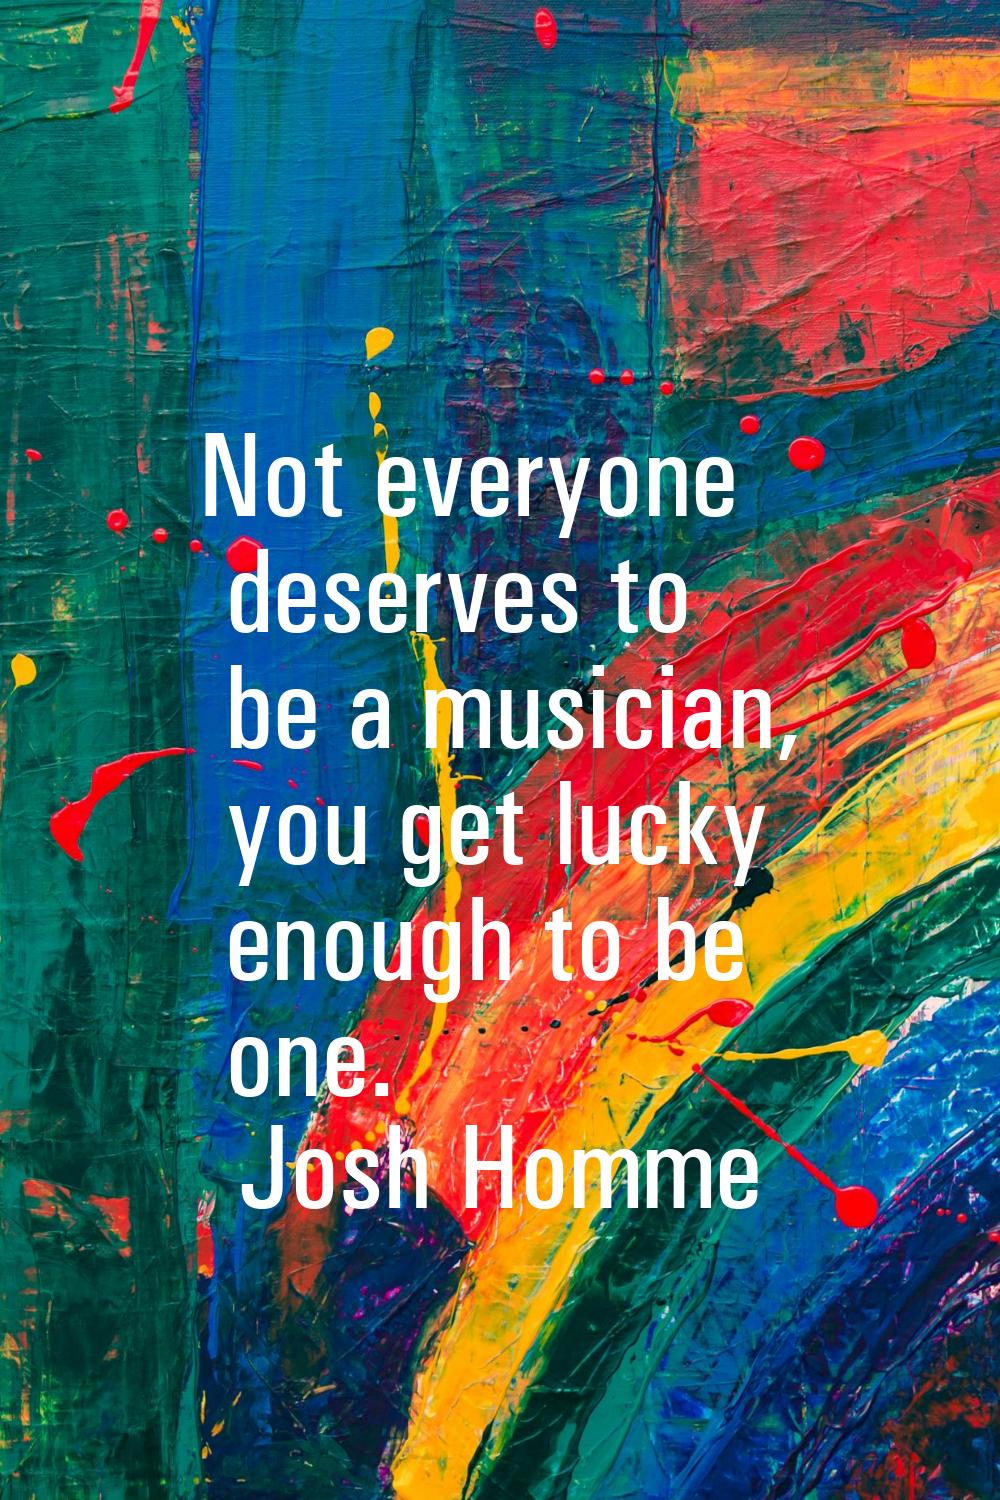 Not everyone deserves to be a musician, you get lucky enough to be one.